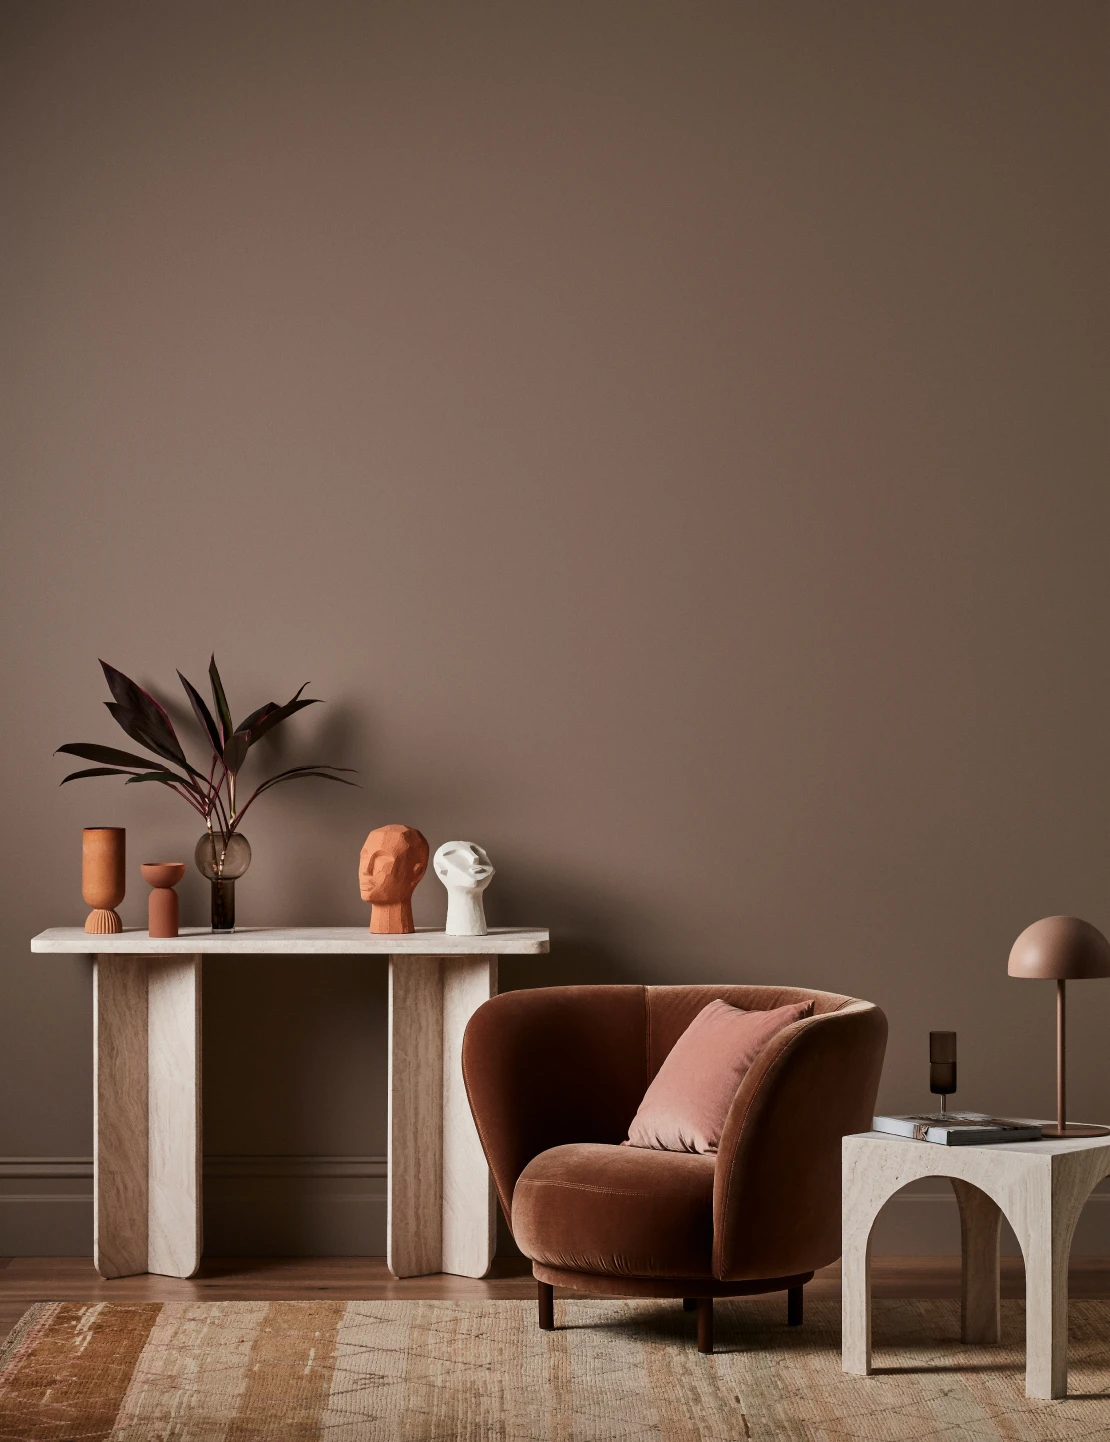 Living room with Toffee Fingers coloured wall, light timber furnishings and plush velvet seat